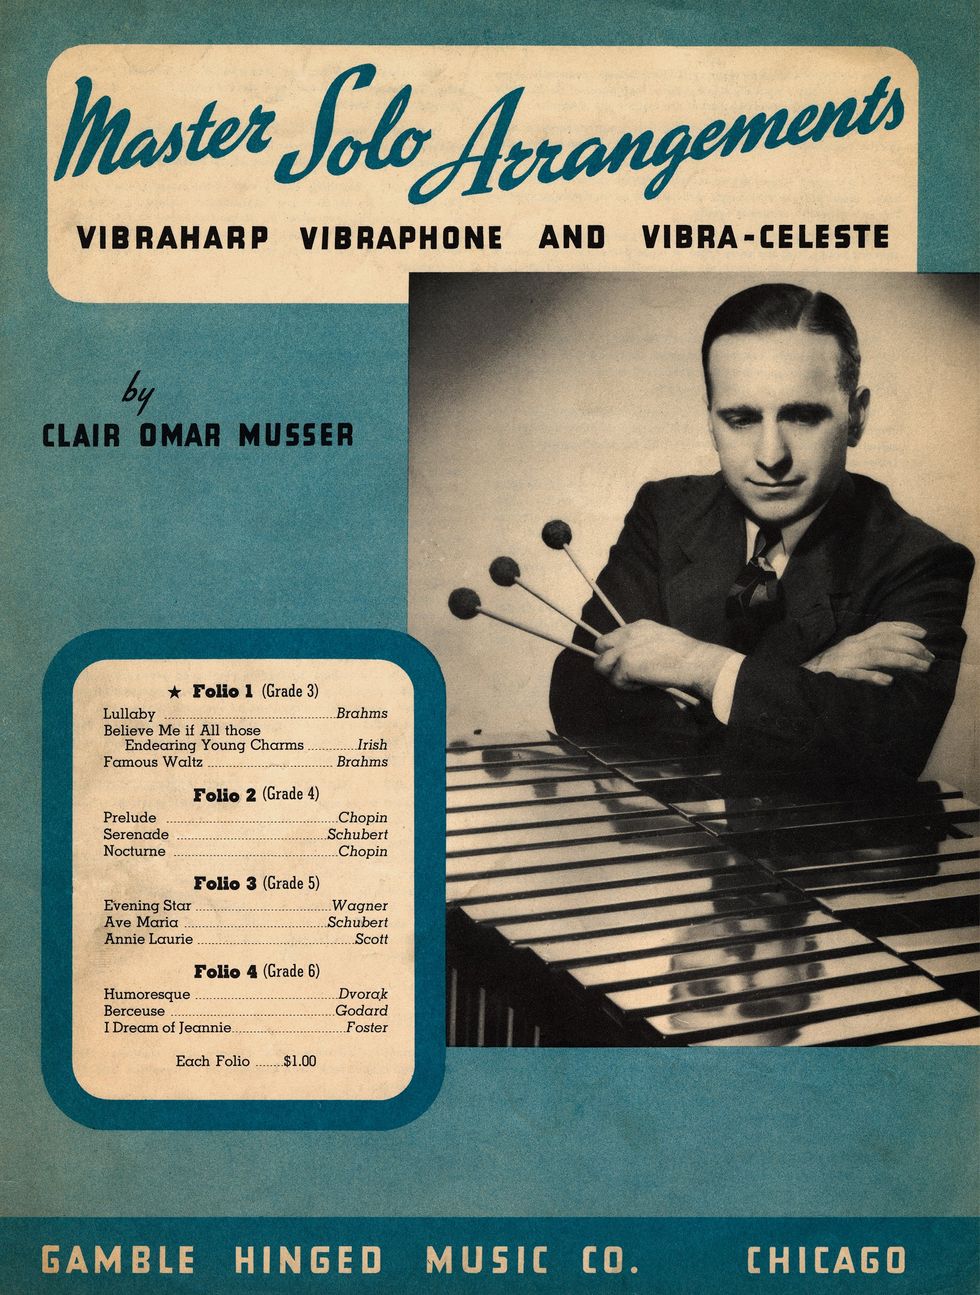 Cover of sheet music featuring a photo of a man and a vibraphone.